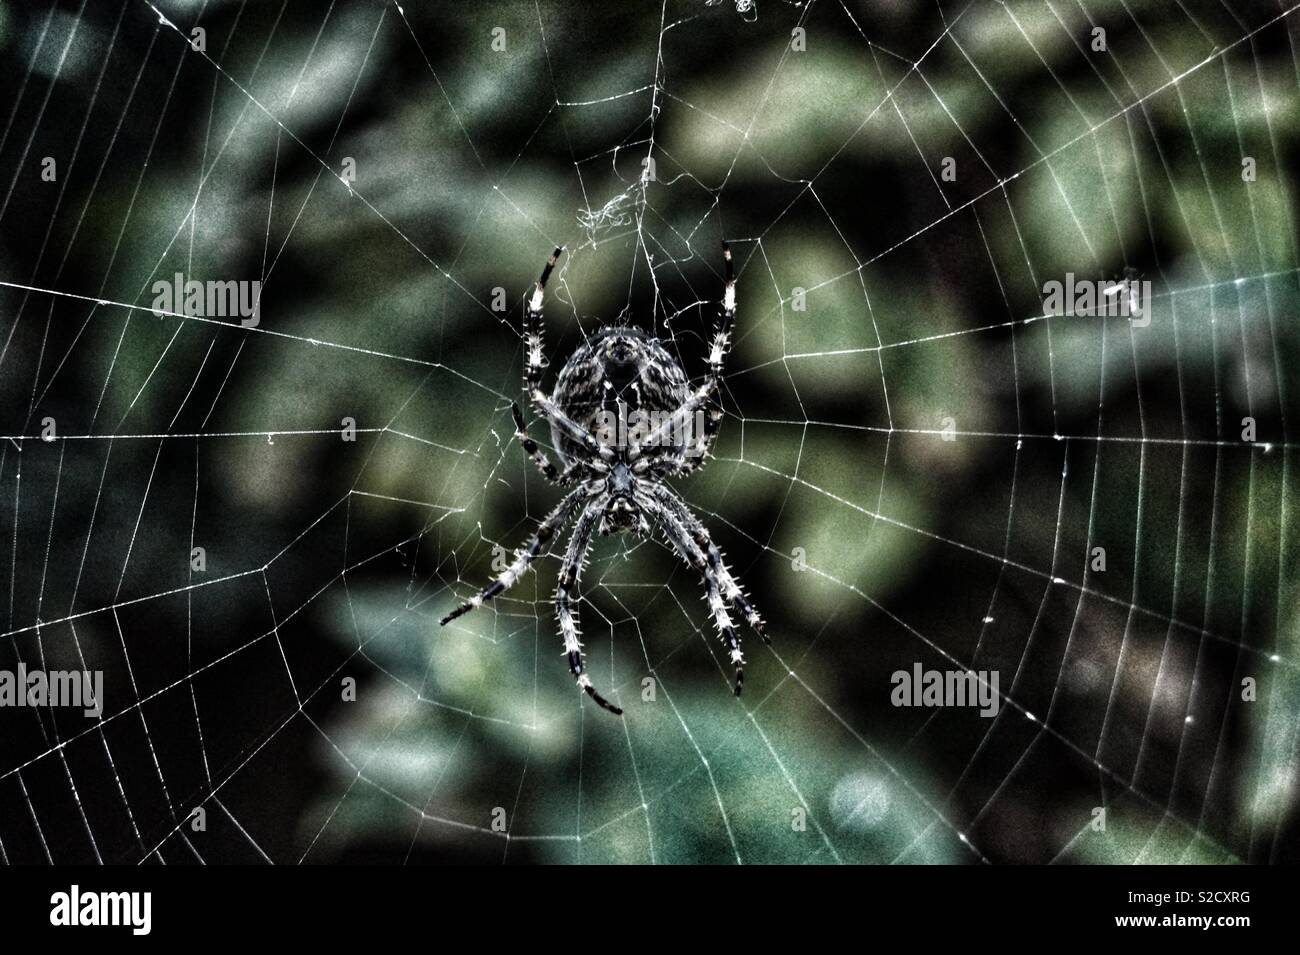 Spider in a web Stock Photo